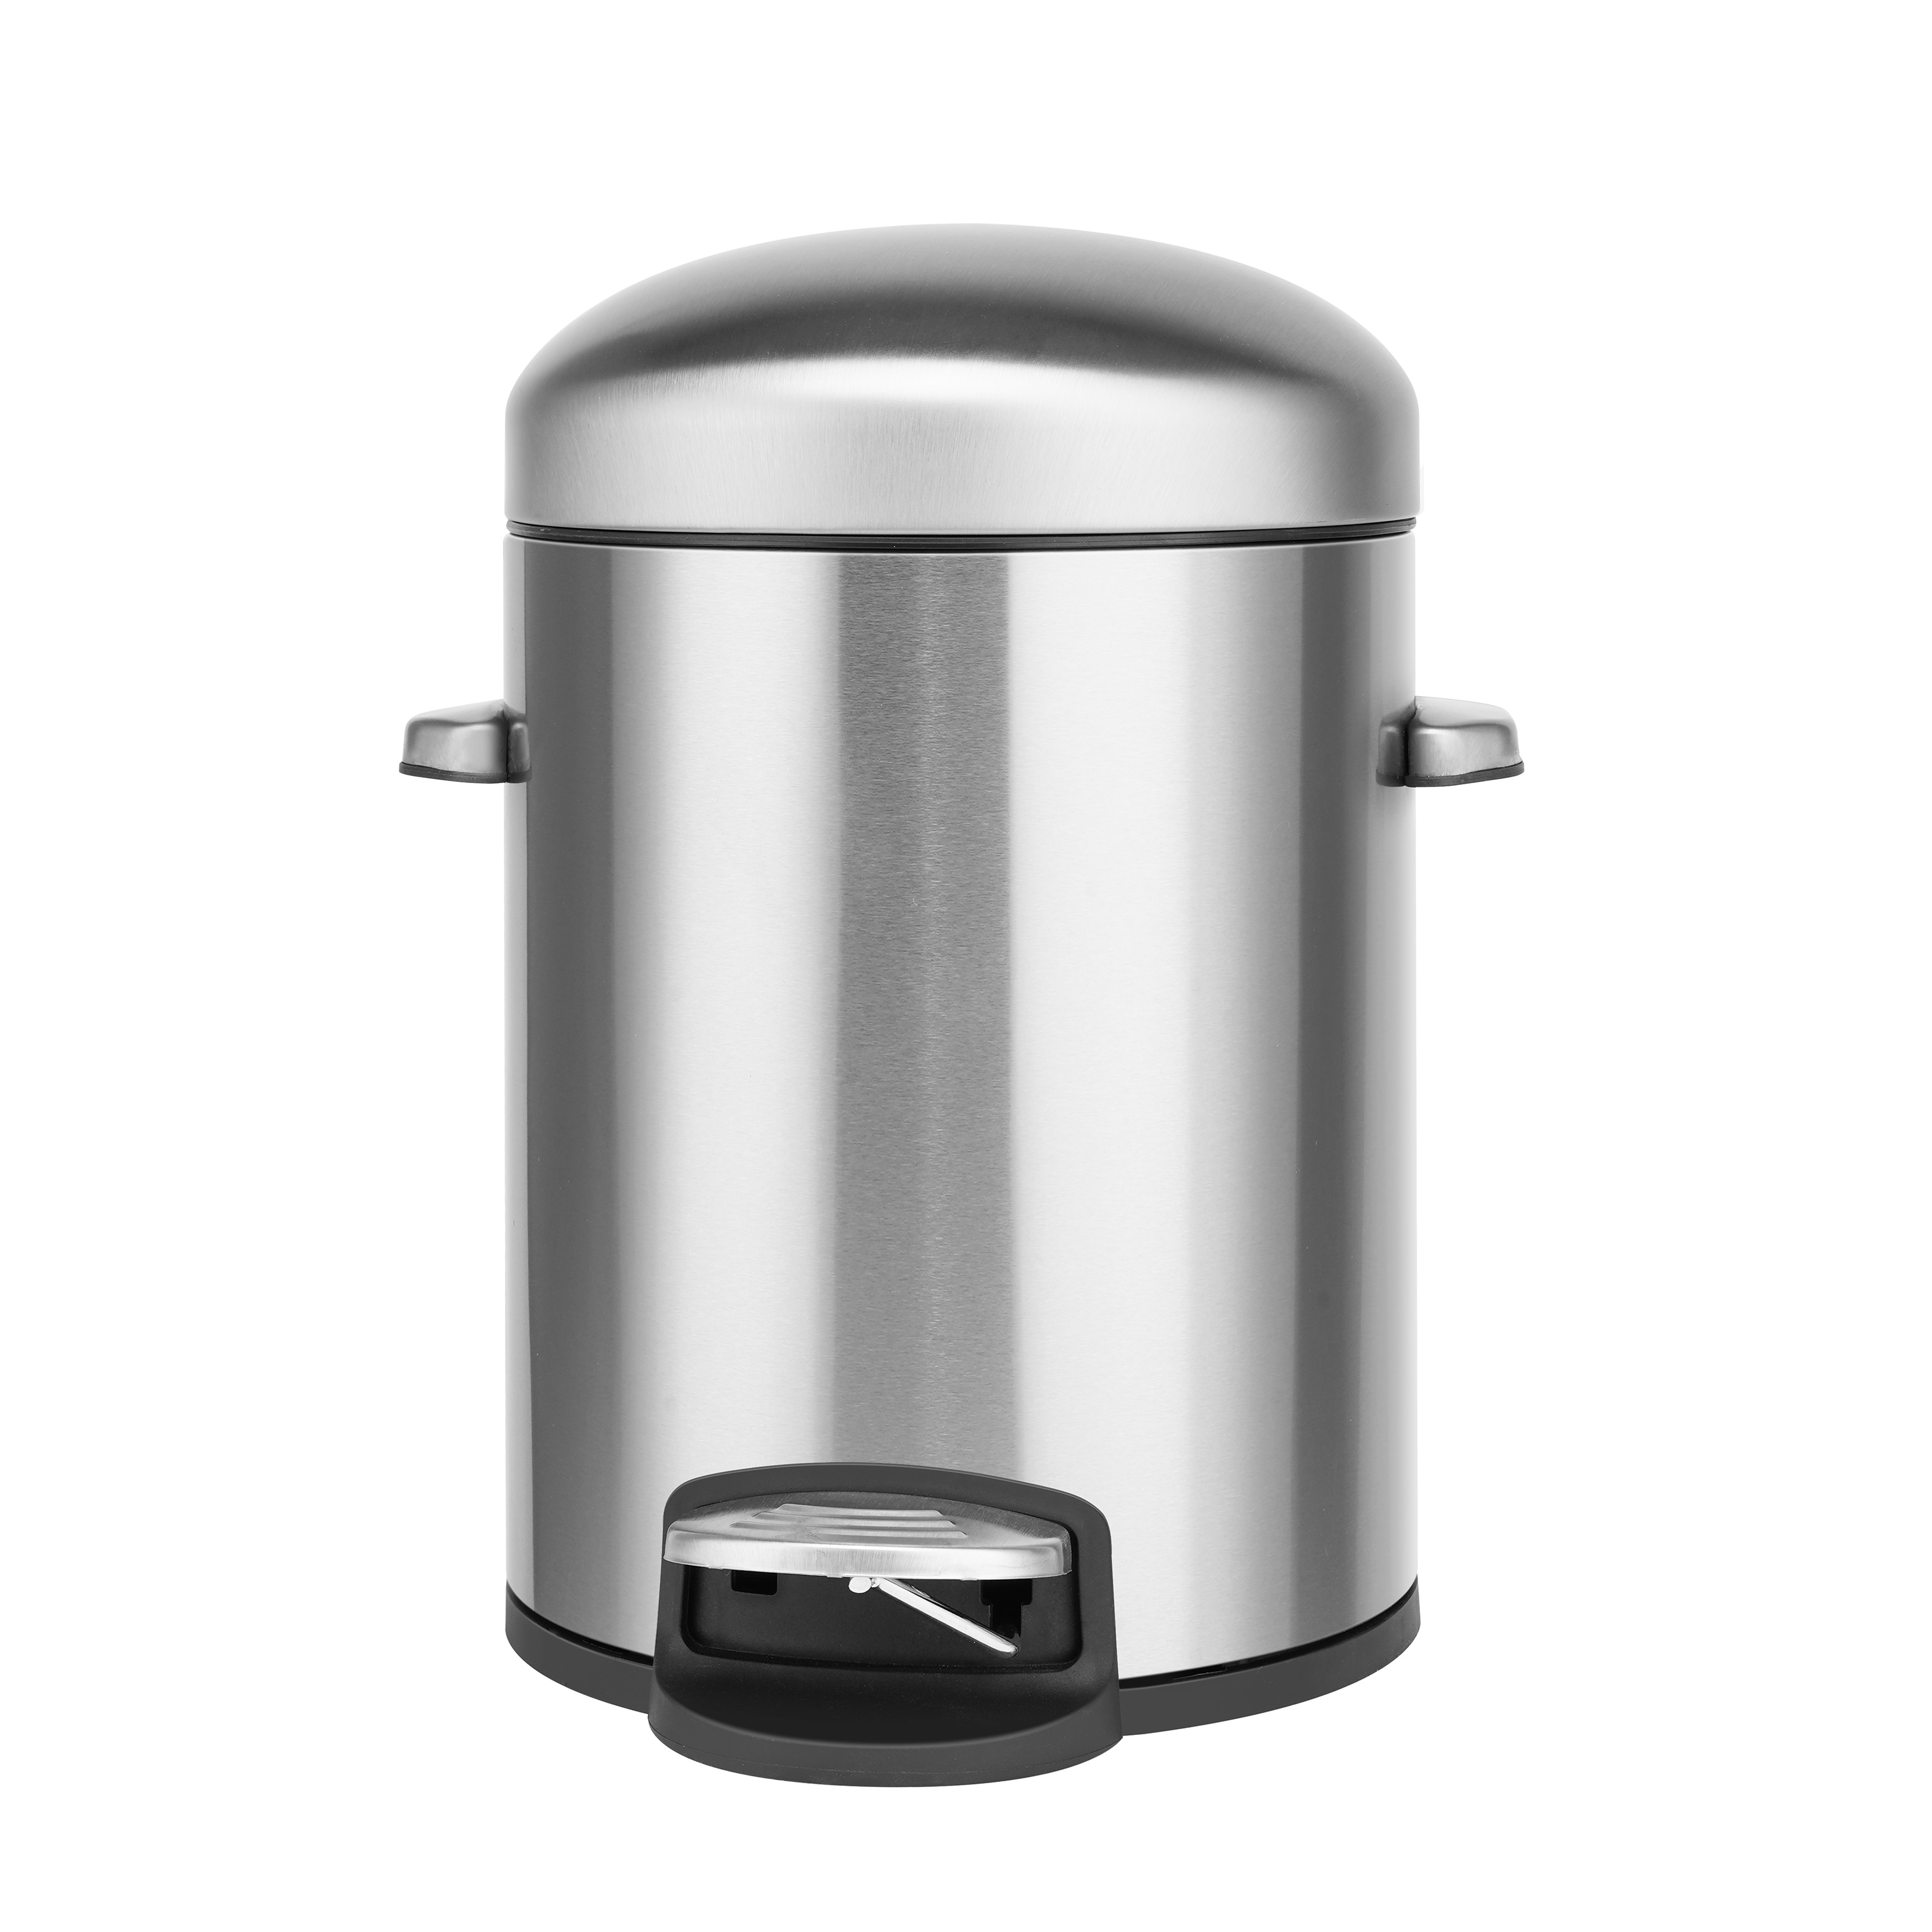 https://ak1.ostkcdn.com/images/products/is/images/direct/02b28334baa6742a403fe2506c860be12e61210d/Innovaze-1.32-Gallon-Stainless-Steel-Round-Step-on-Bathroom-and-Office-Trash-Can.jpg